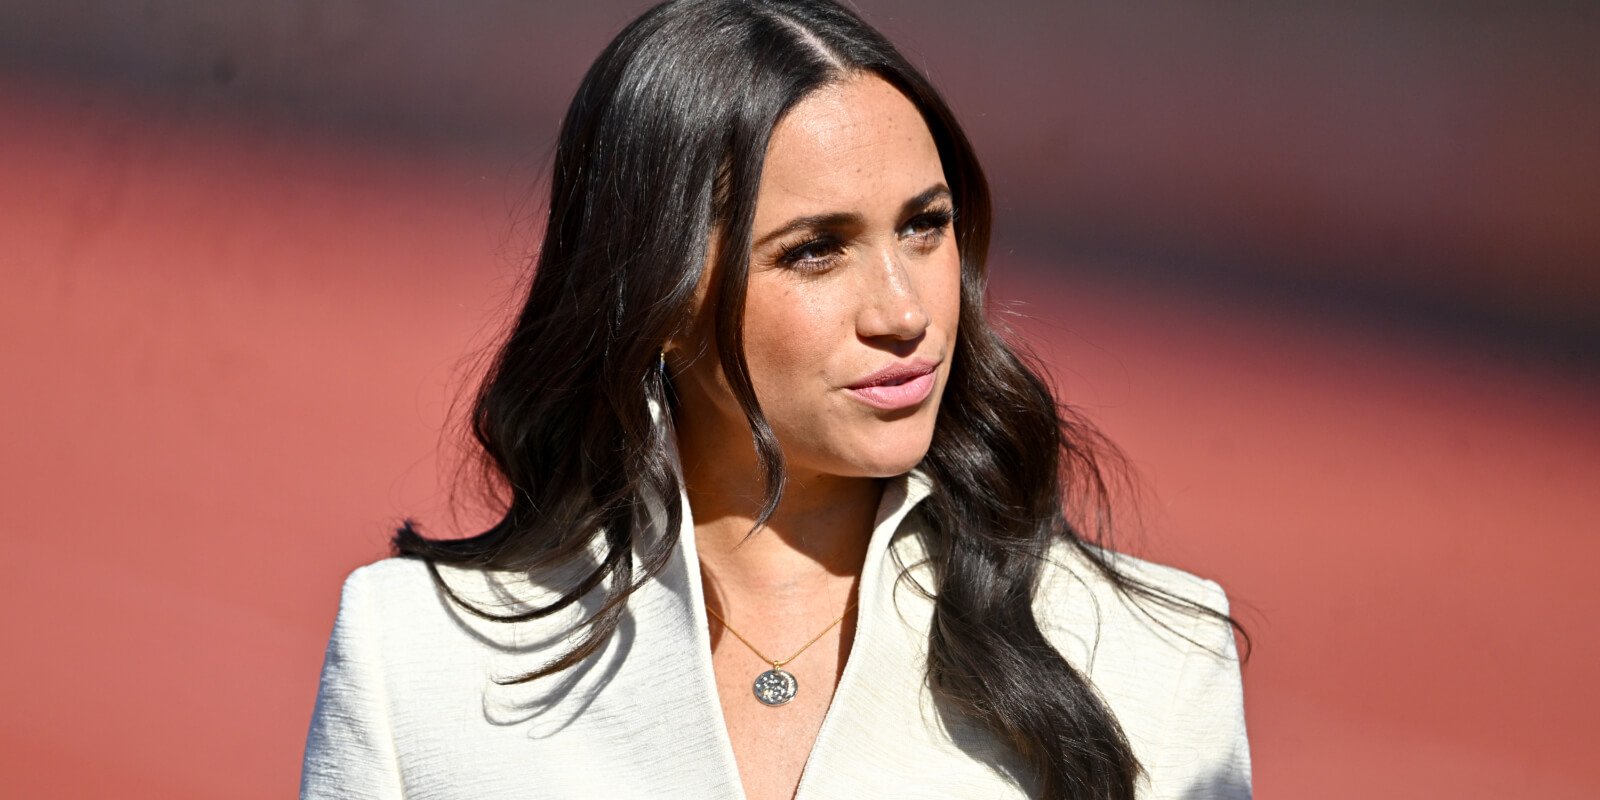 Meghan Markle reportedly is not attending King Charles' coronation due to what may be an uncomfortable reaction from the British public and her in-laws.